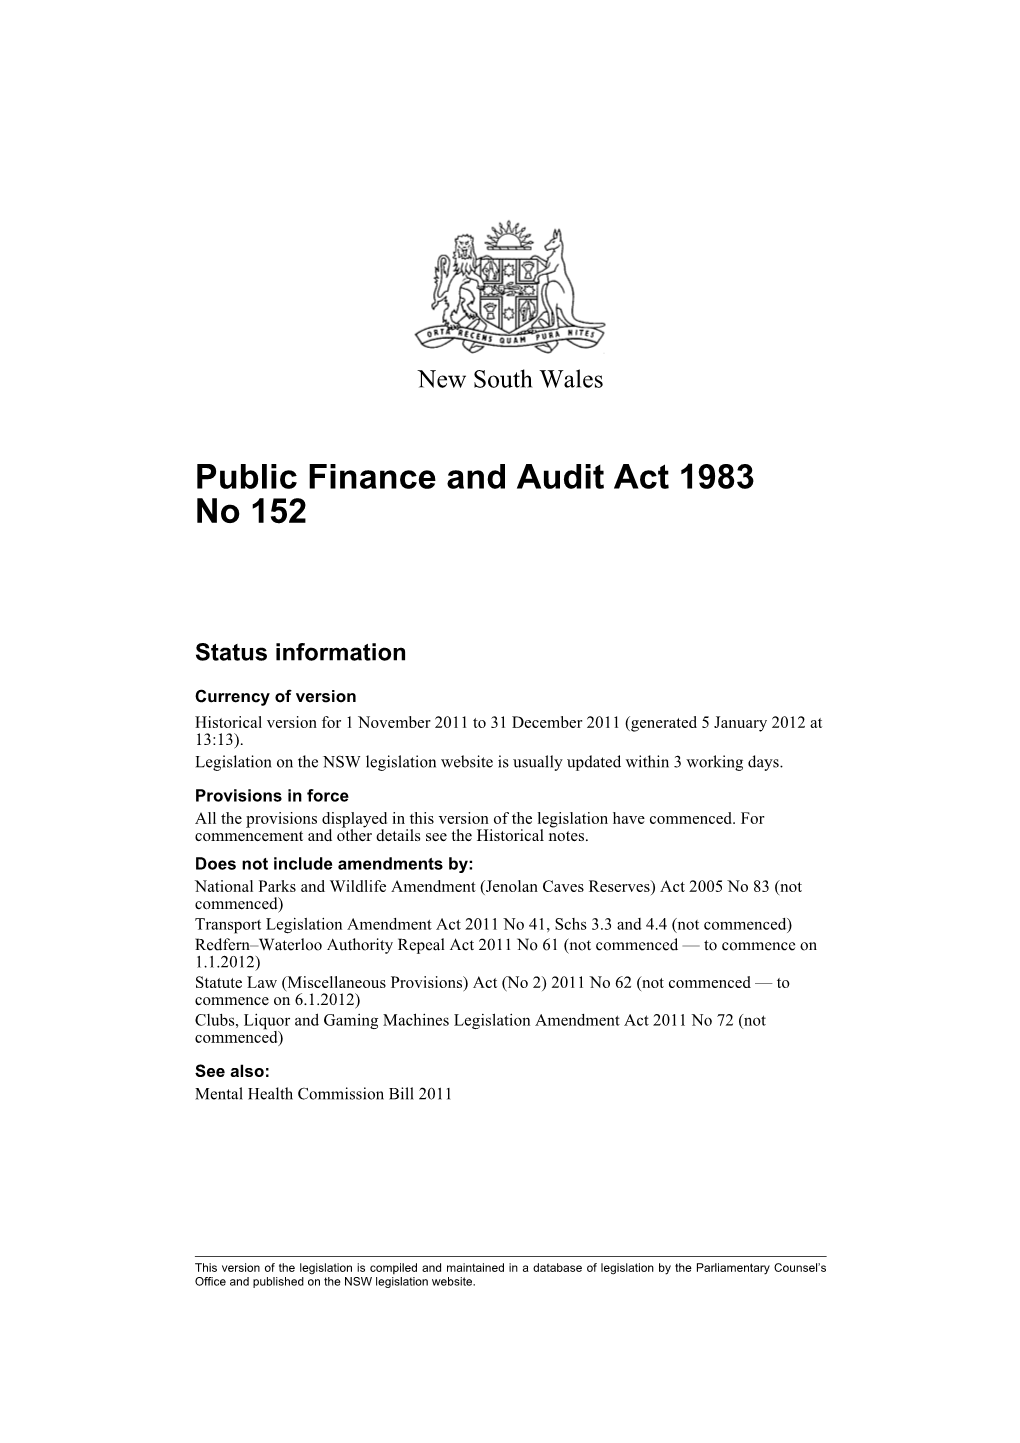 Public Finance and Audit Act 1983 No 152